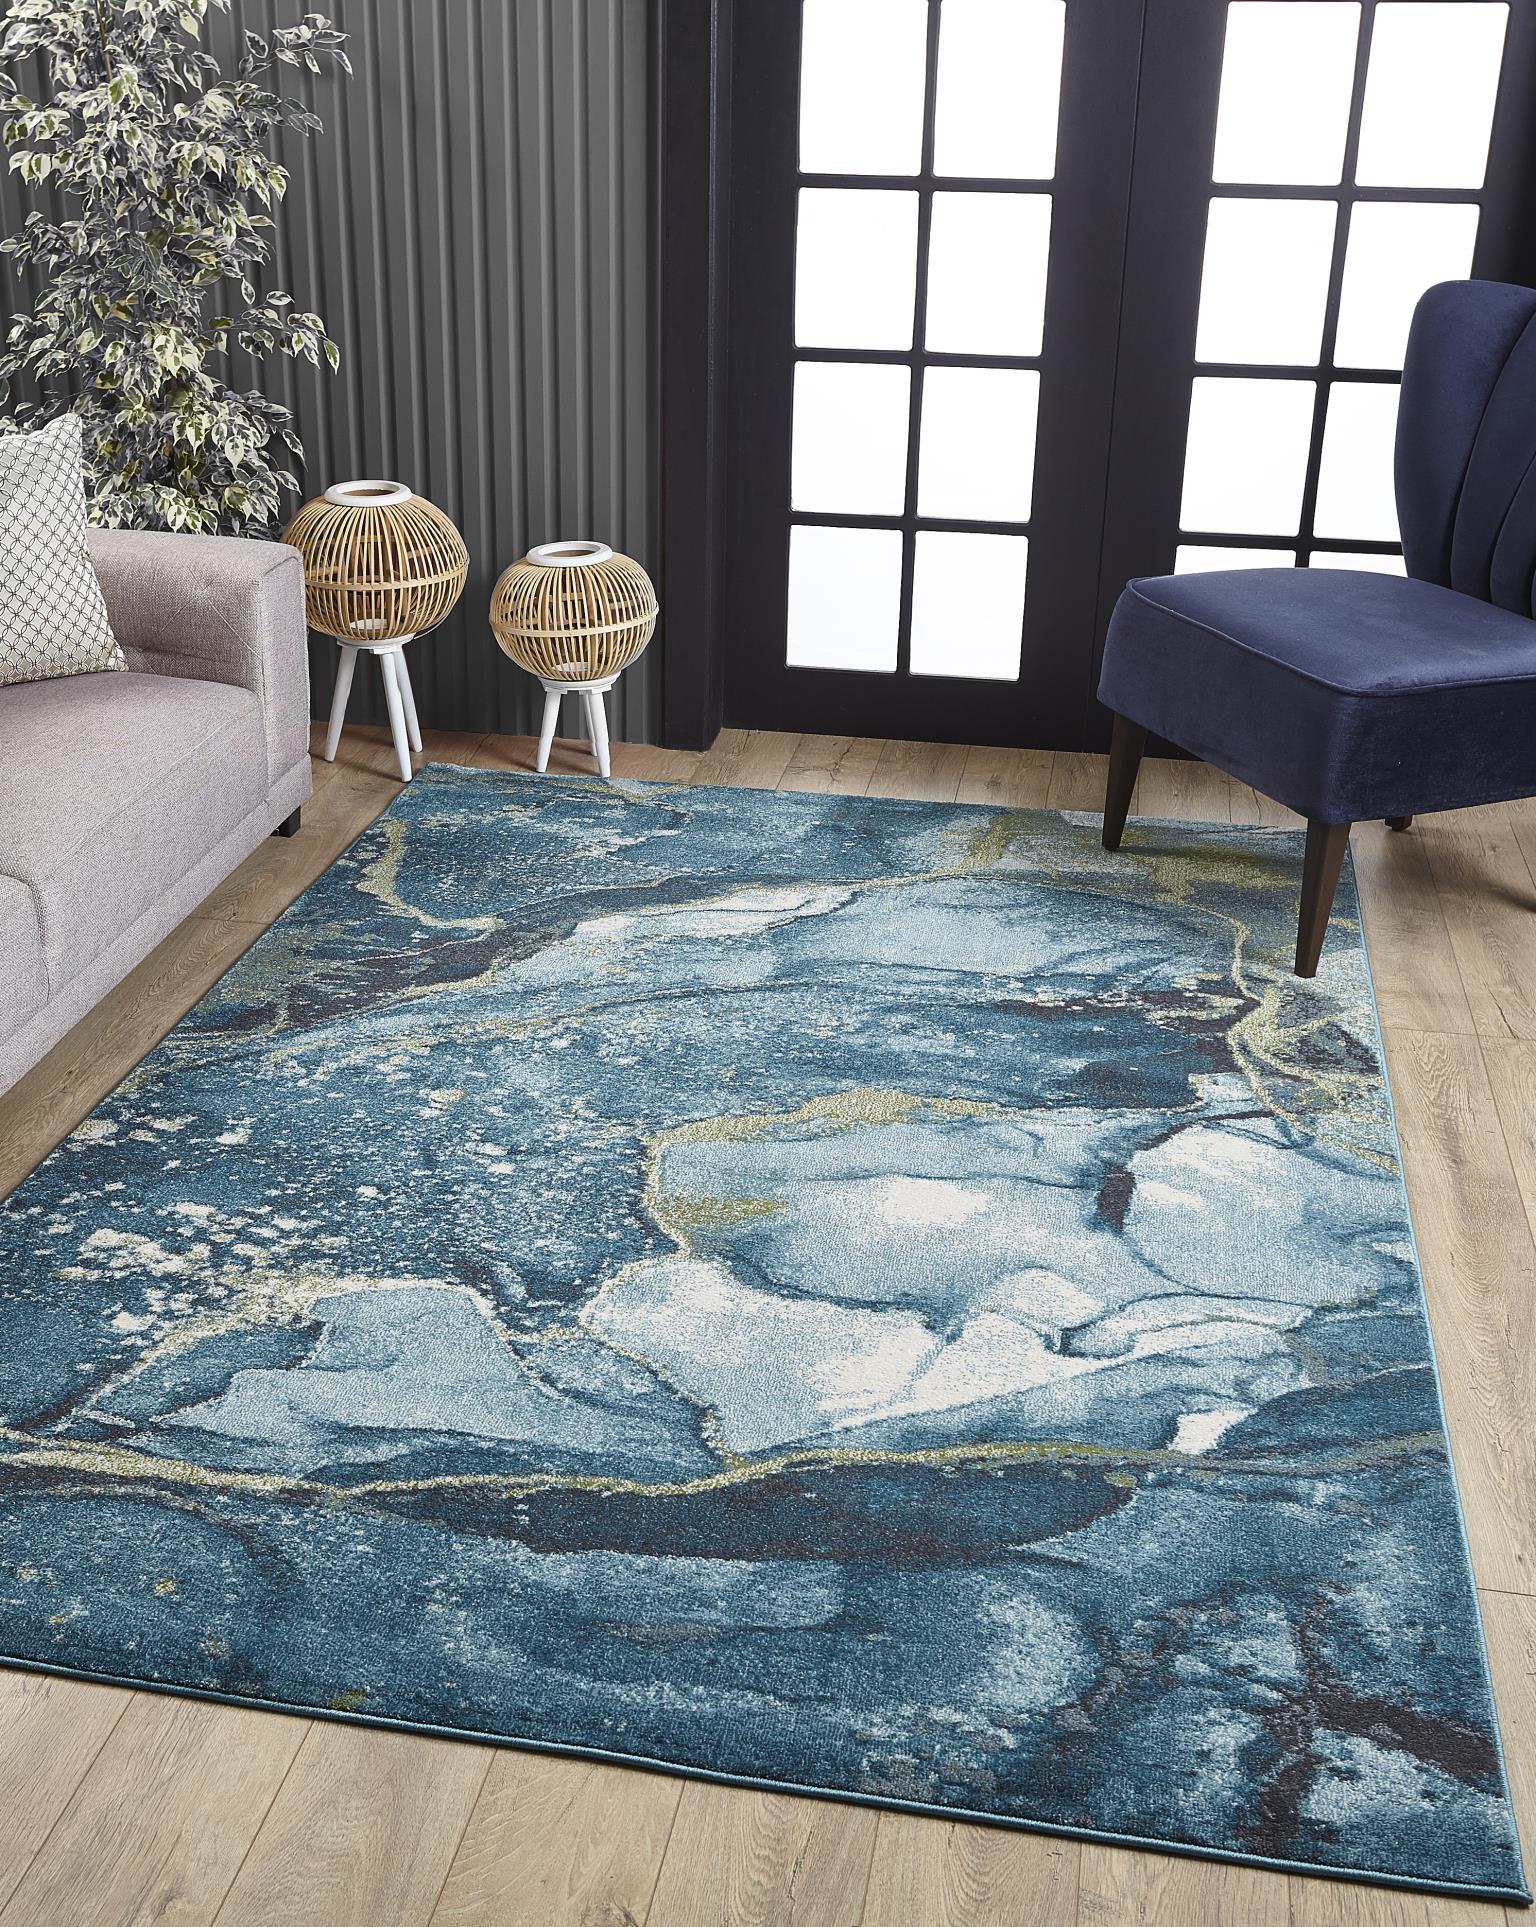 Illusions 6225 Teal Stone Rug - Rug & Home